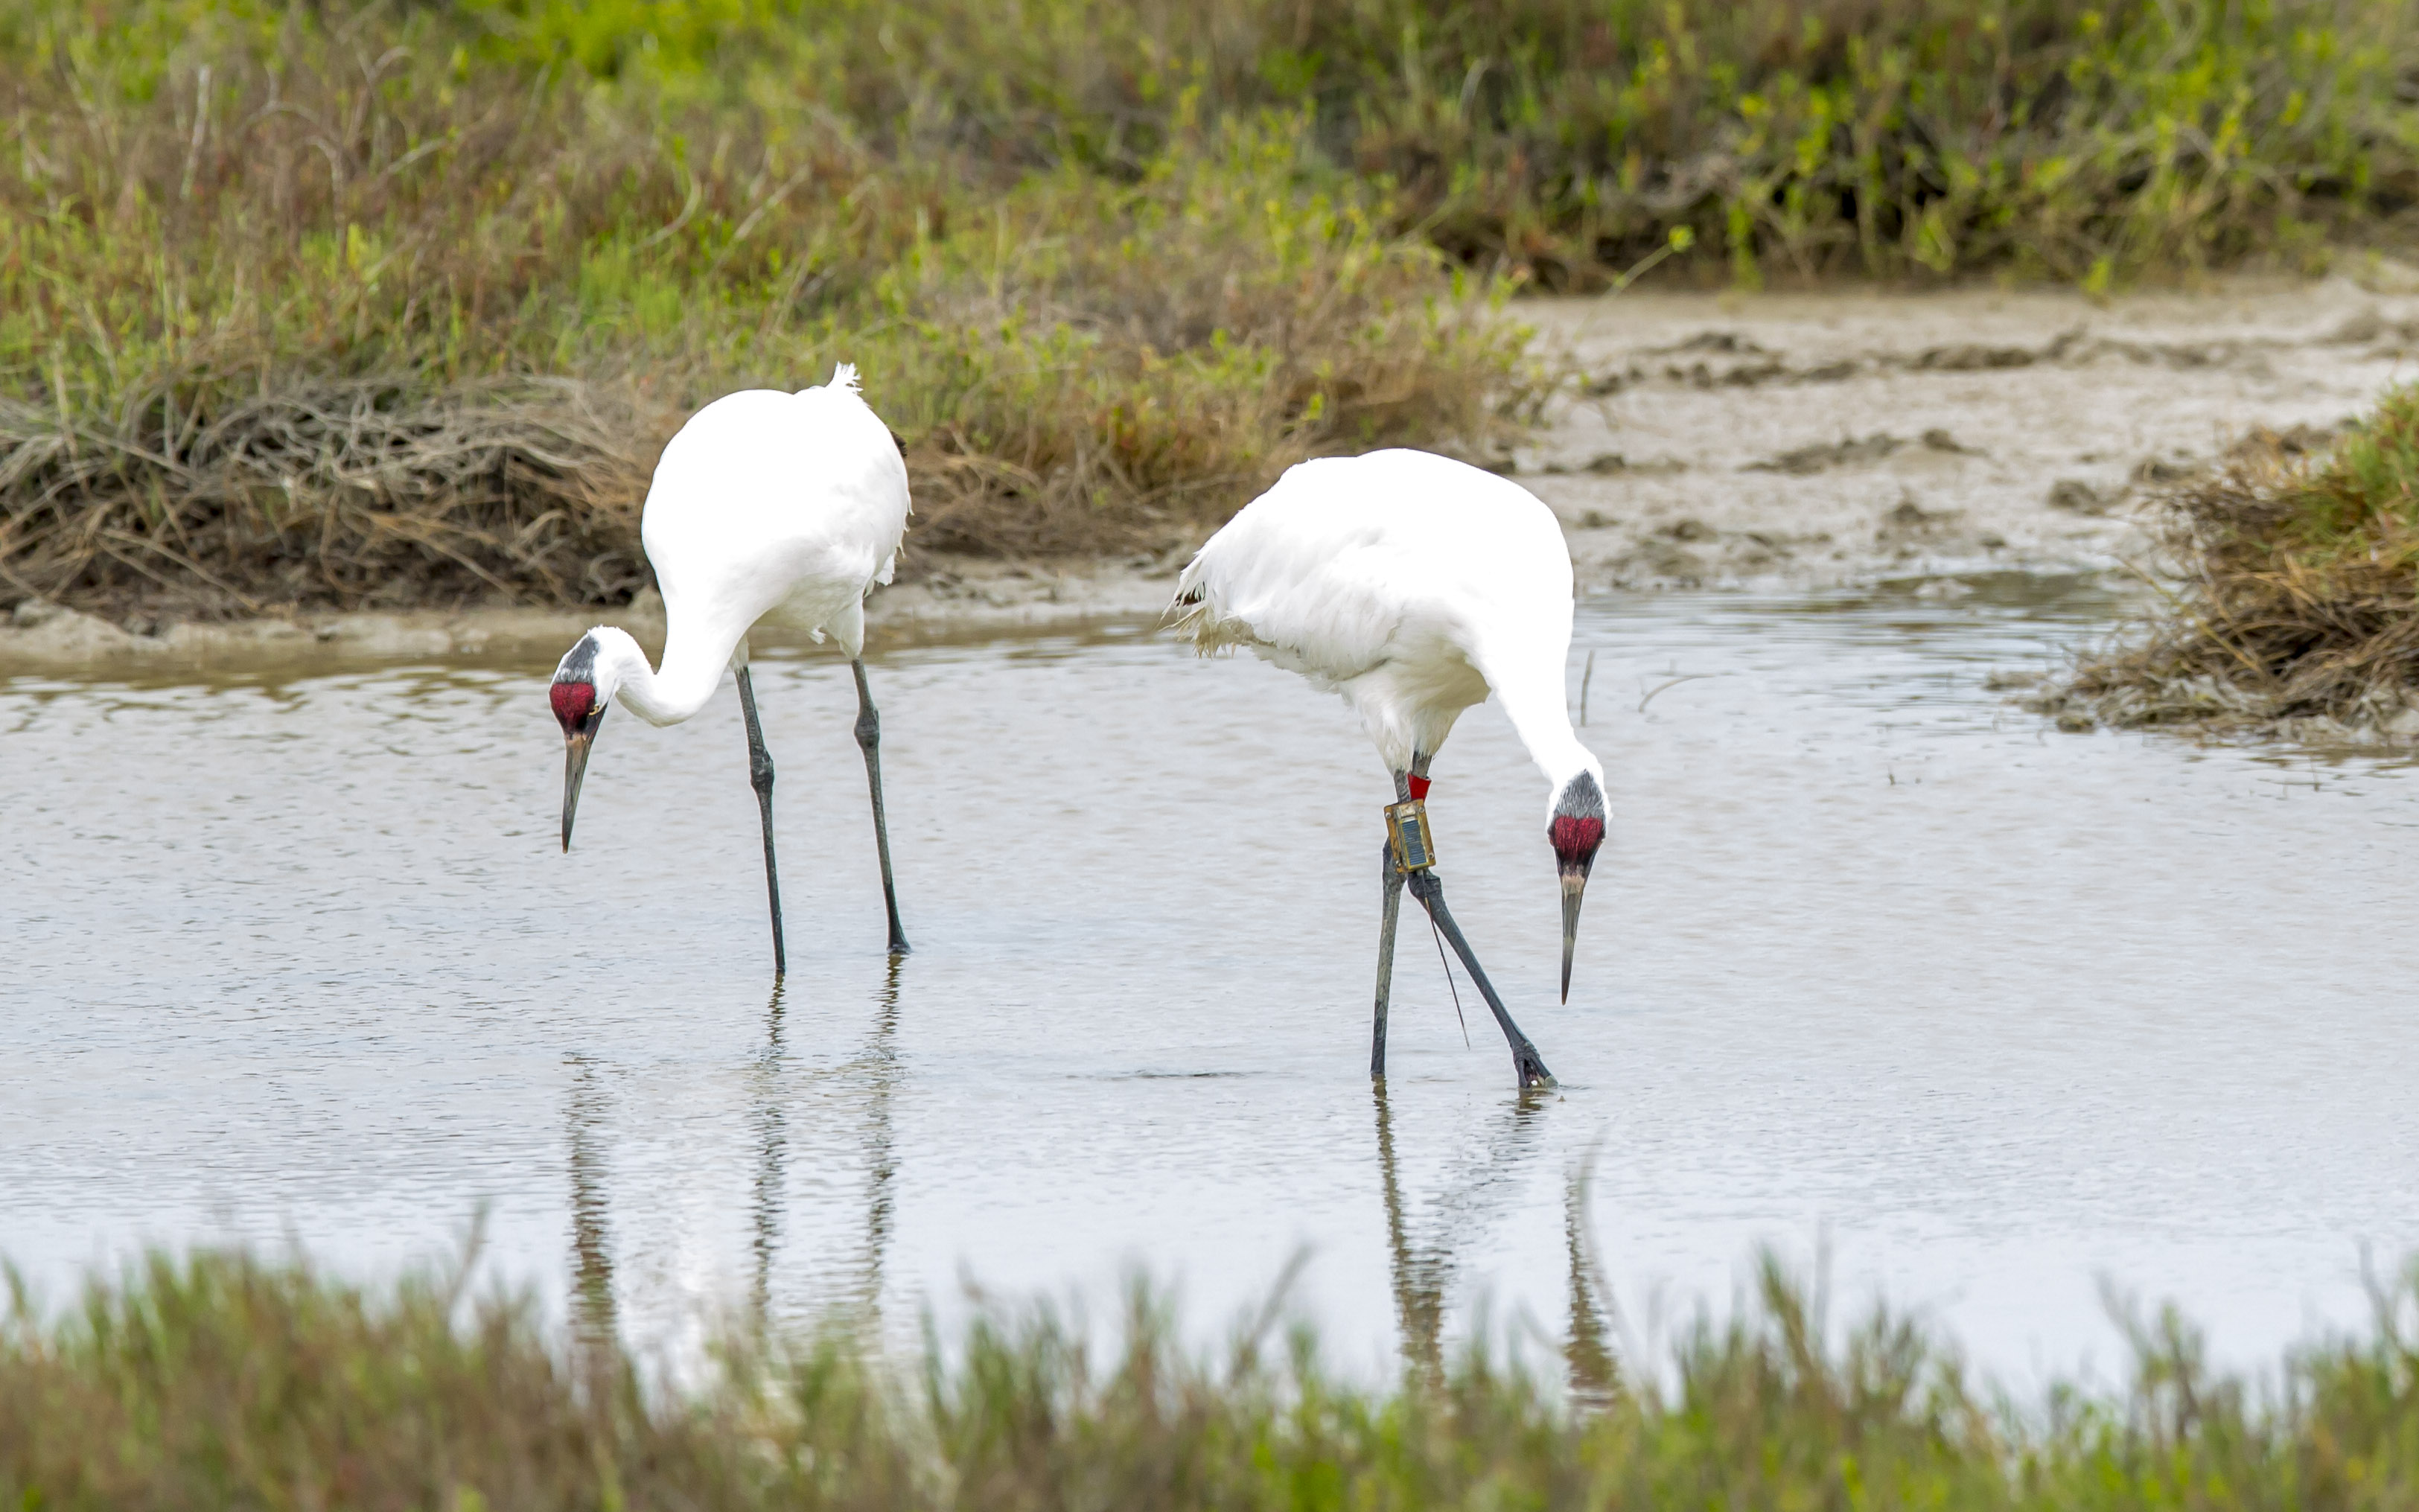 Whooping cranes foraging in Texas